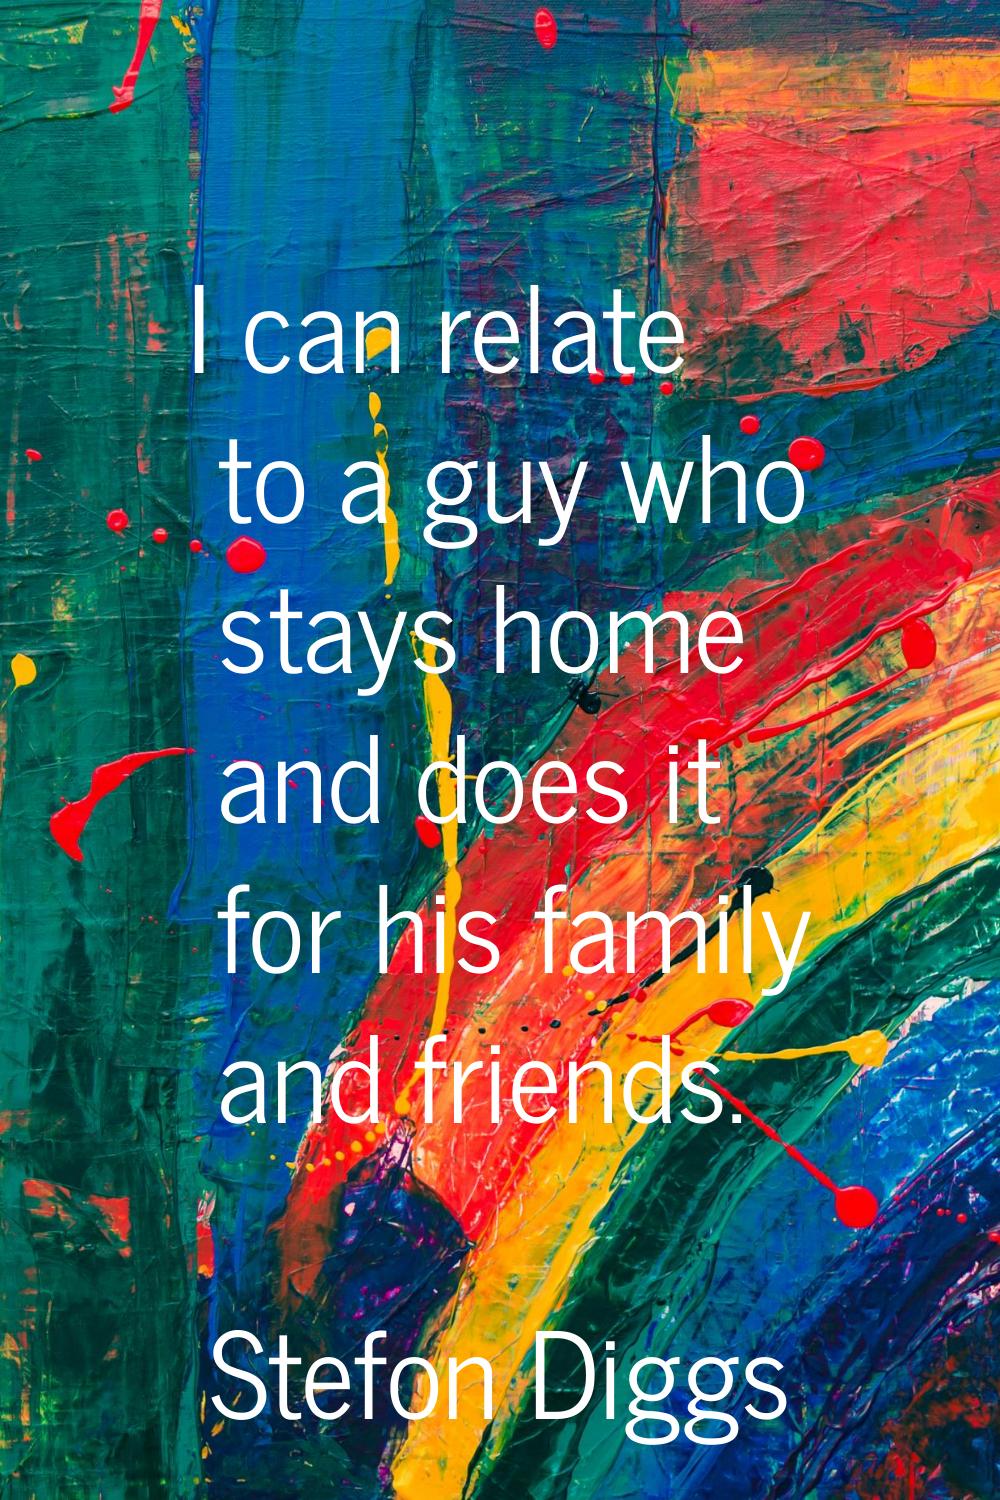 I can relate to a guy who stays home and does it for his family and friends.